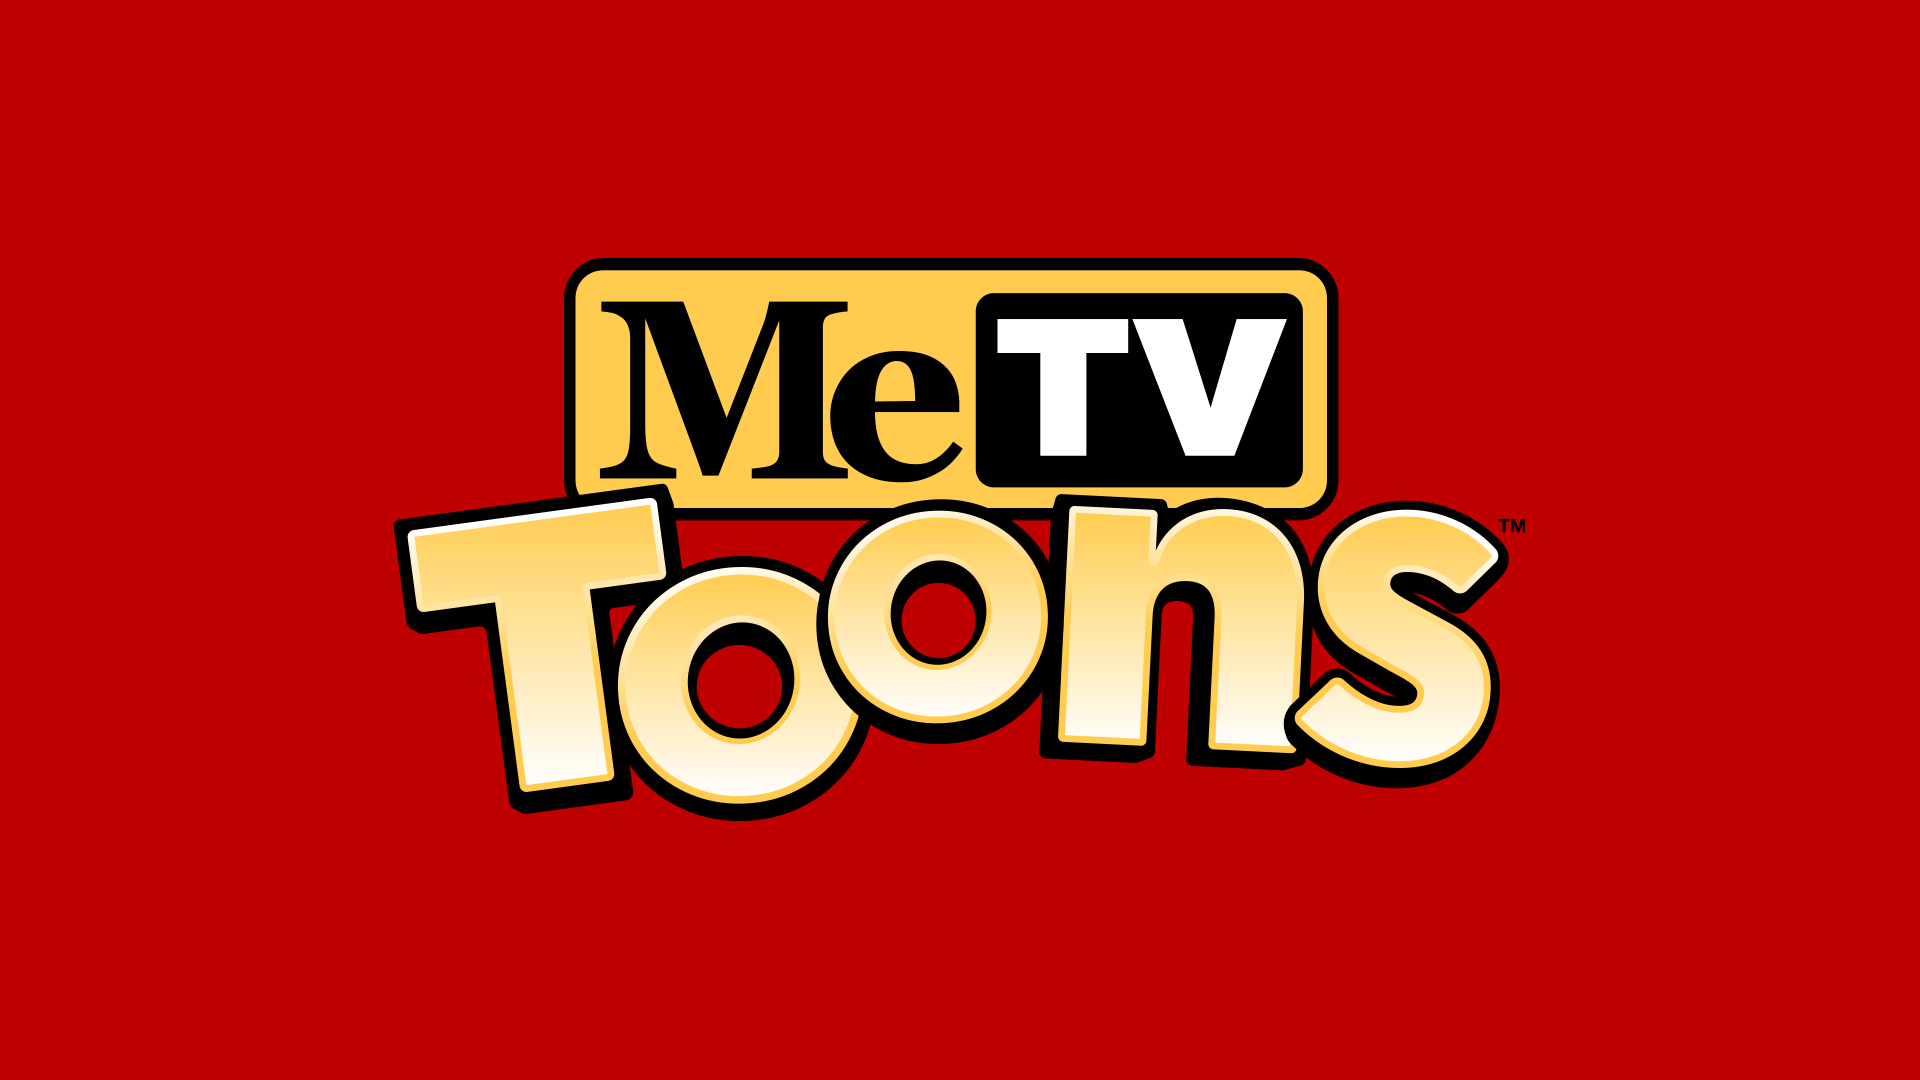 MeTV Toons is Now Live in 5 New Markets